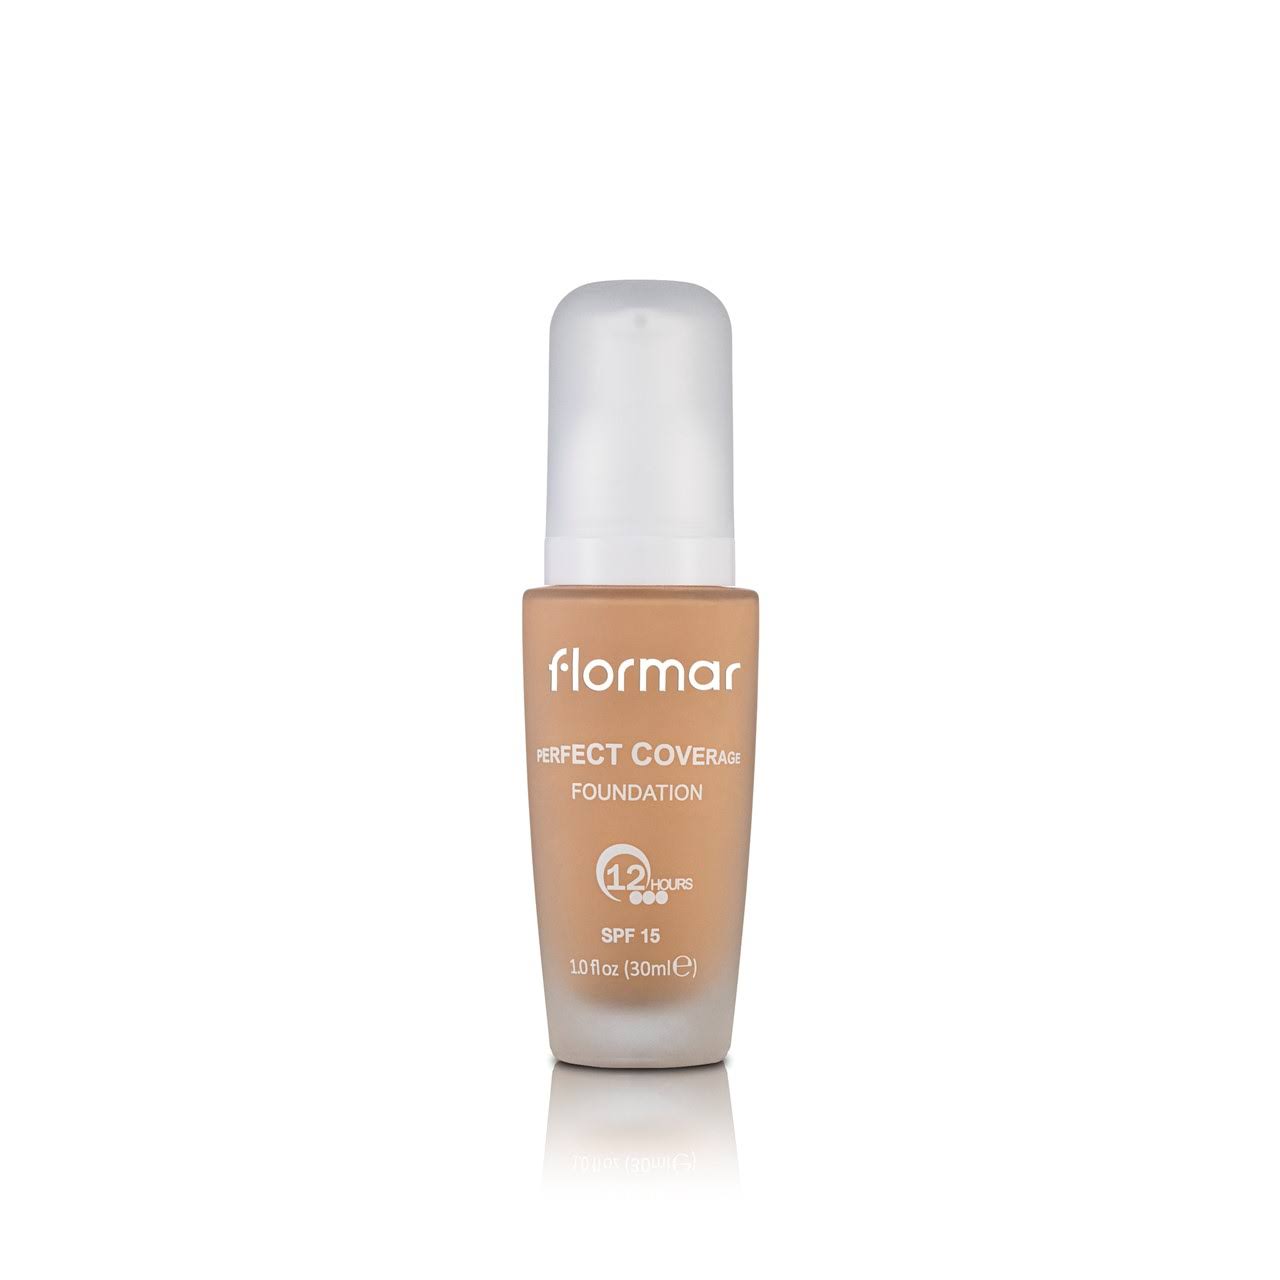 Flormar Perfect Coverage Foundation - 102